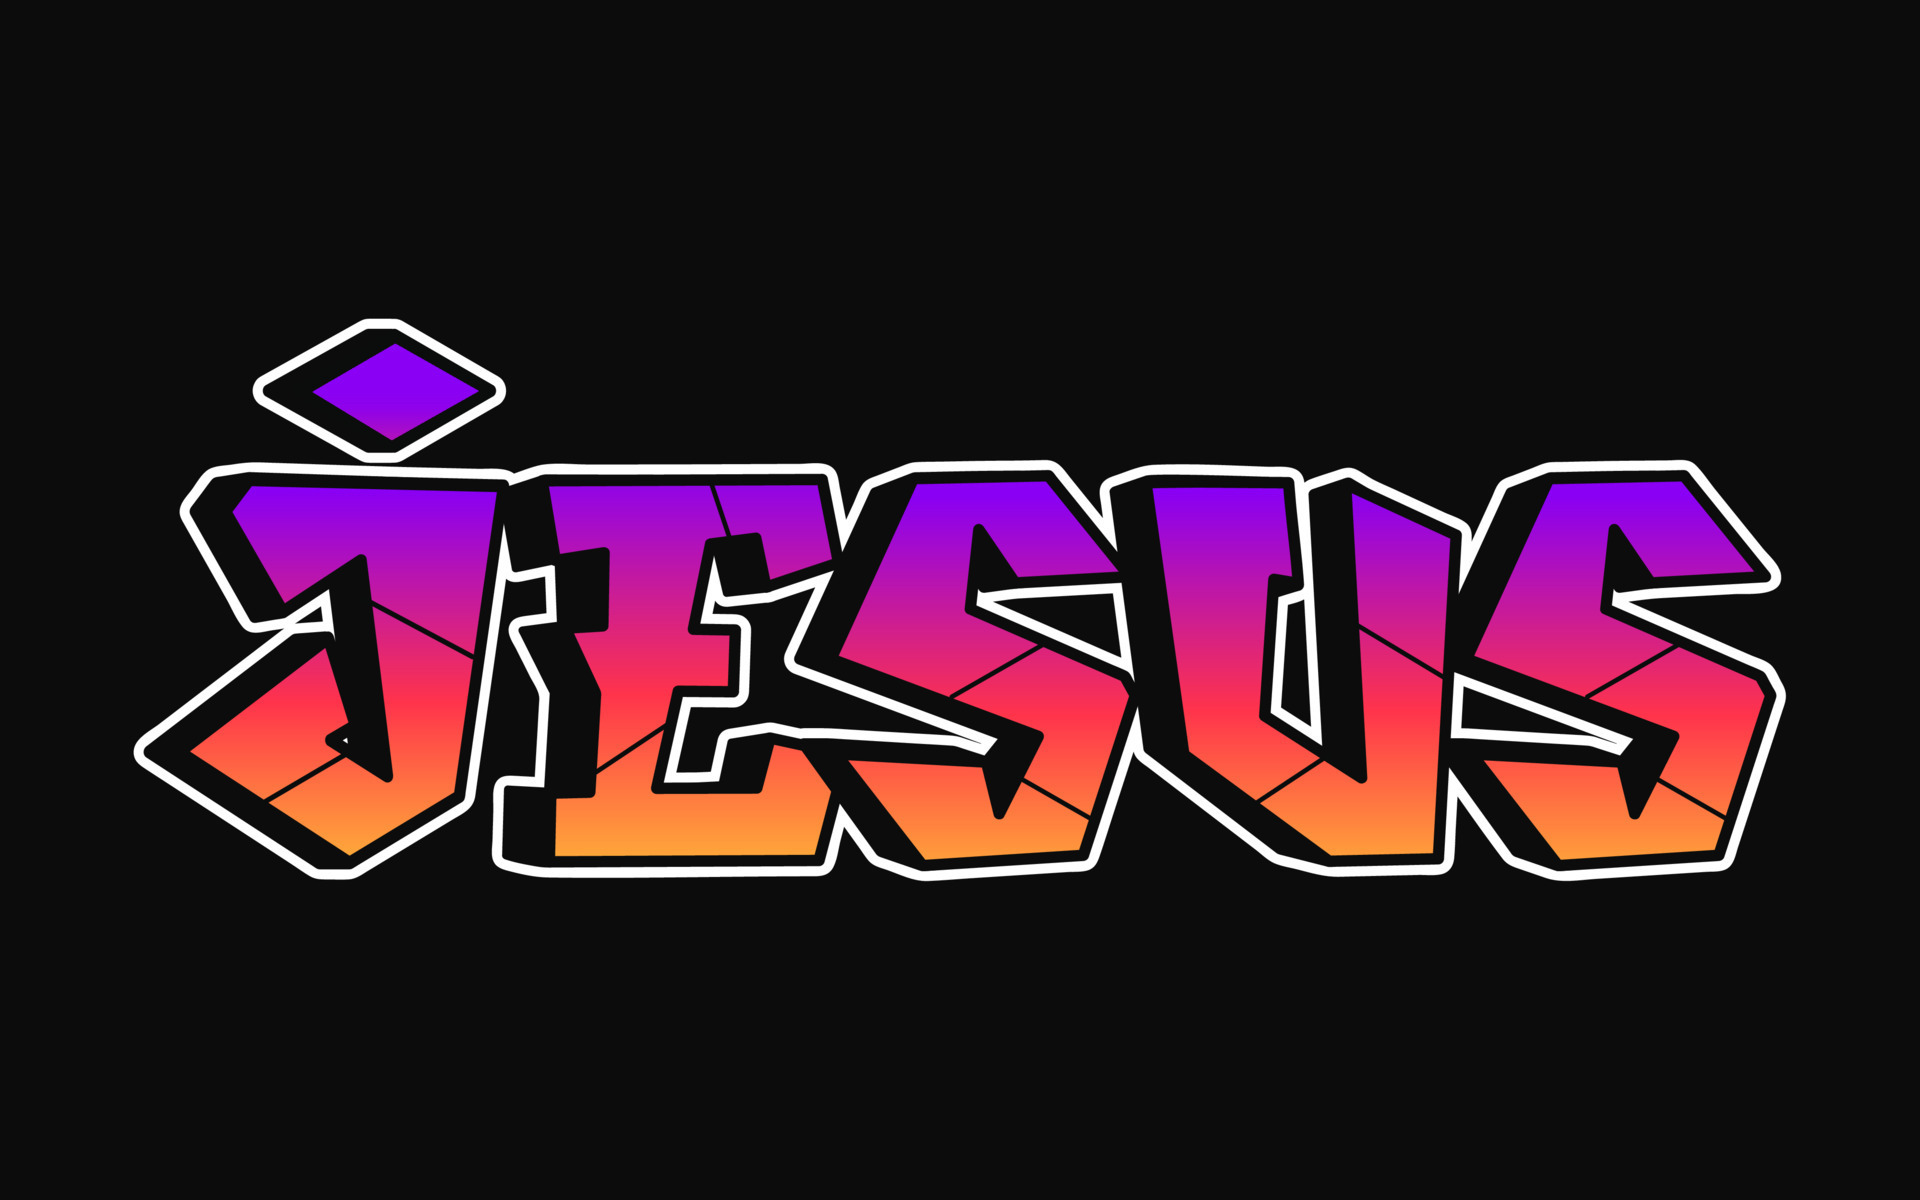 Jesus word trippy psychedelic graffiti style letters.Vector hand drawn ...